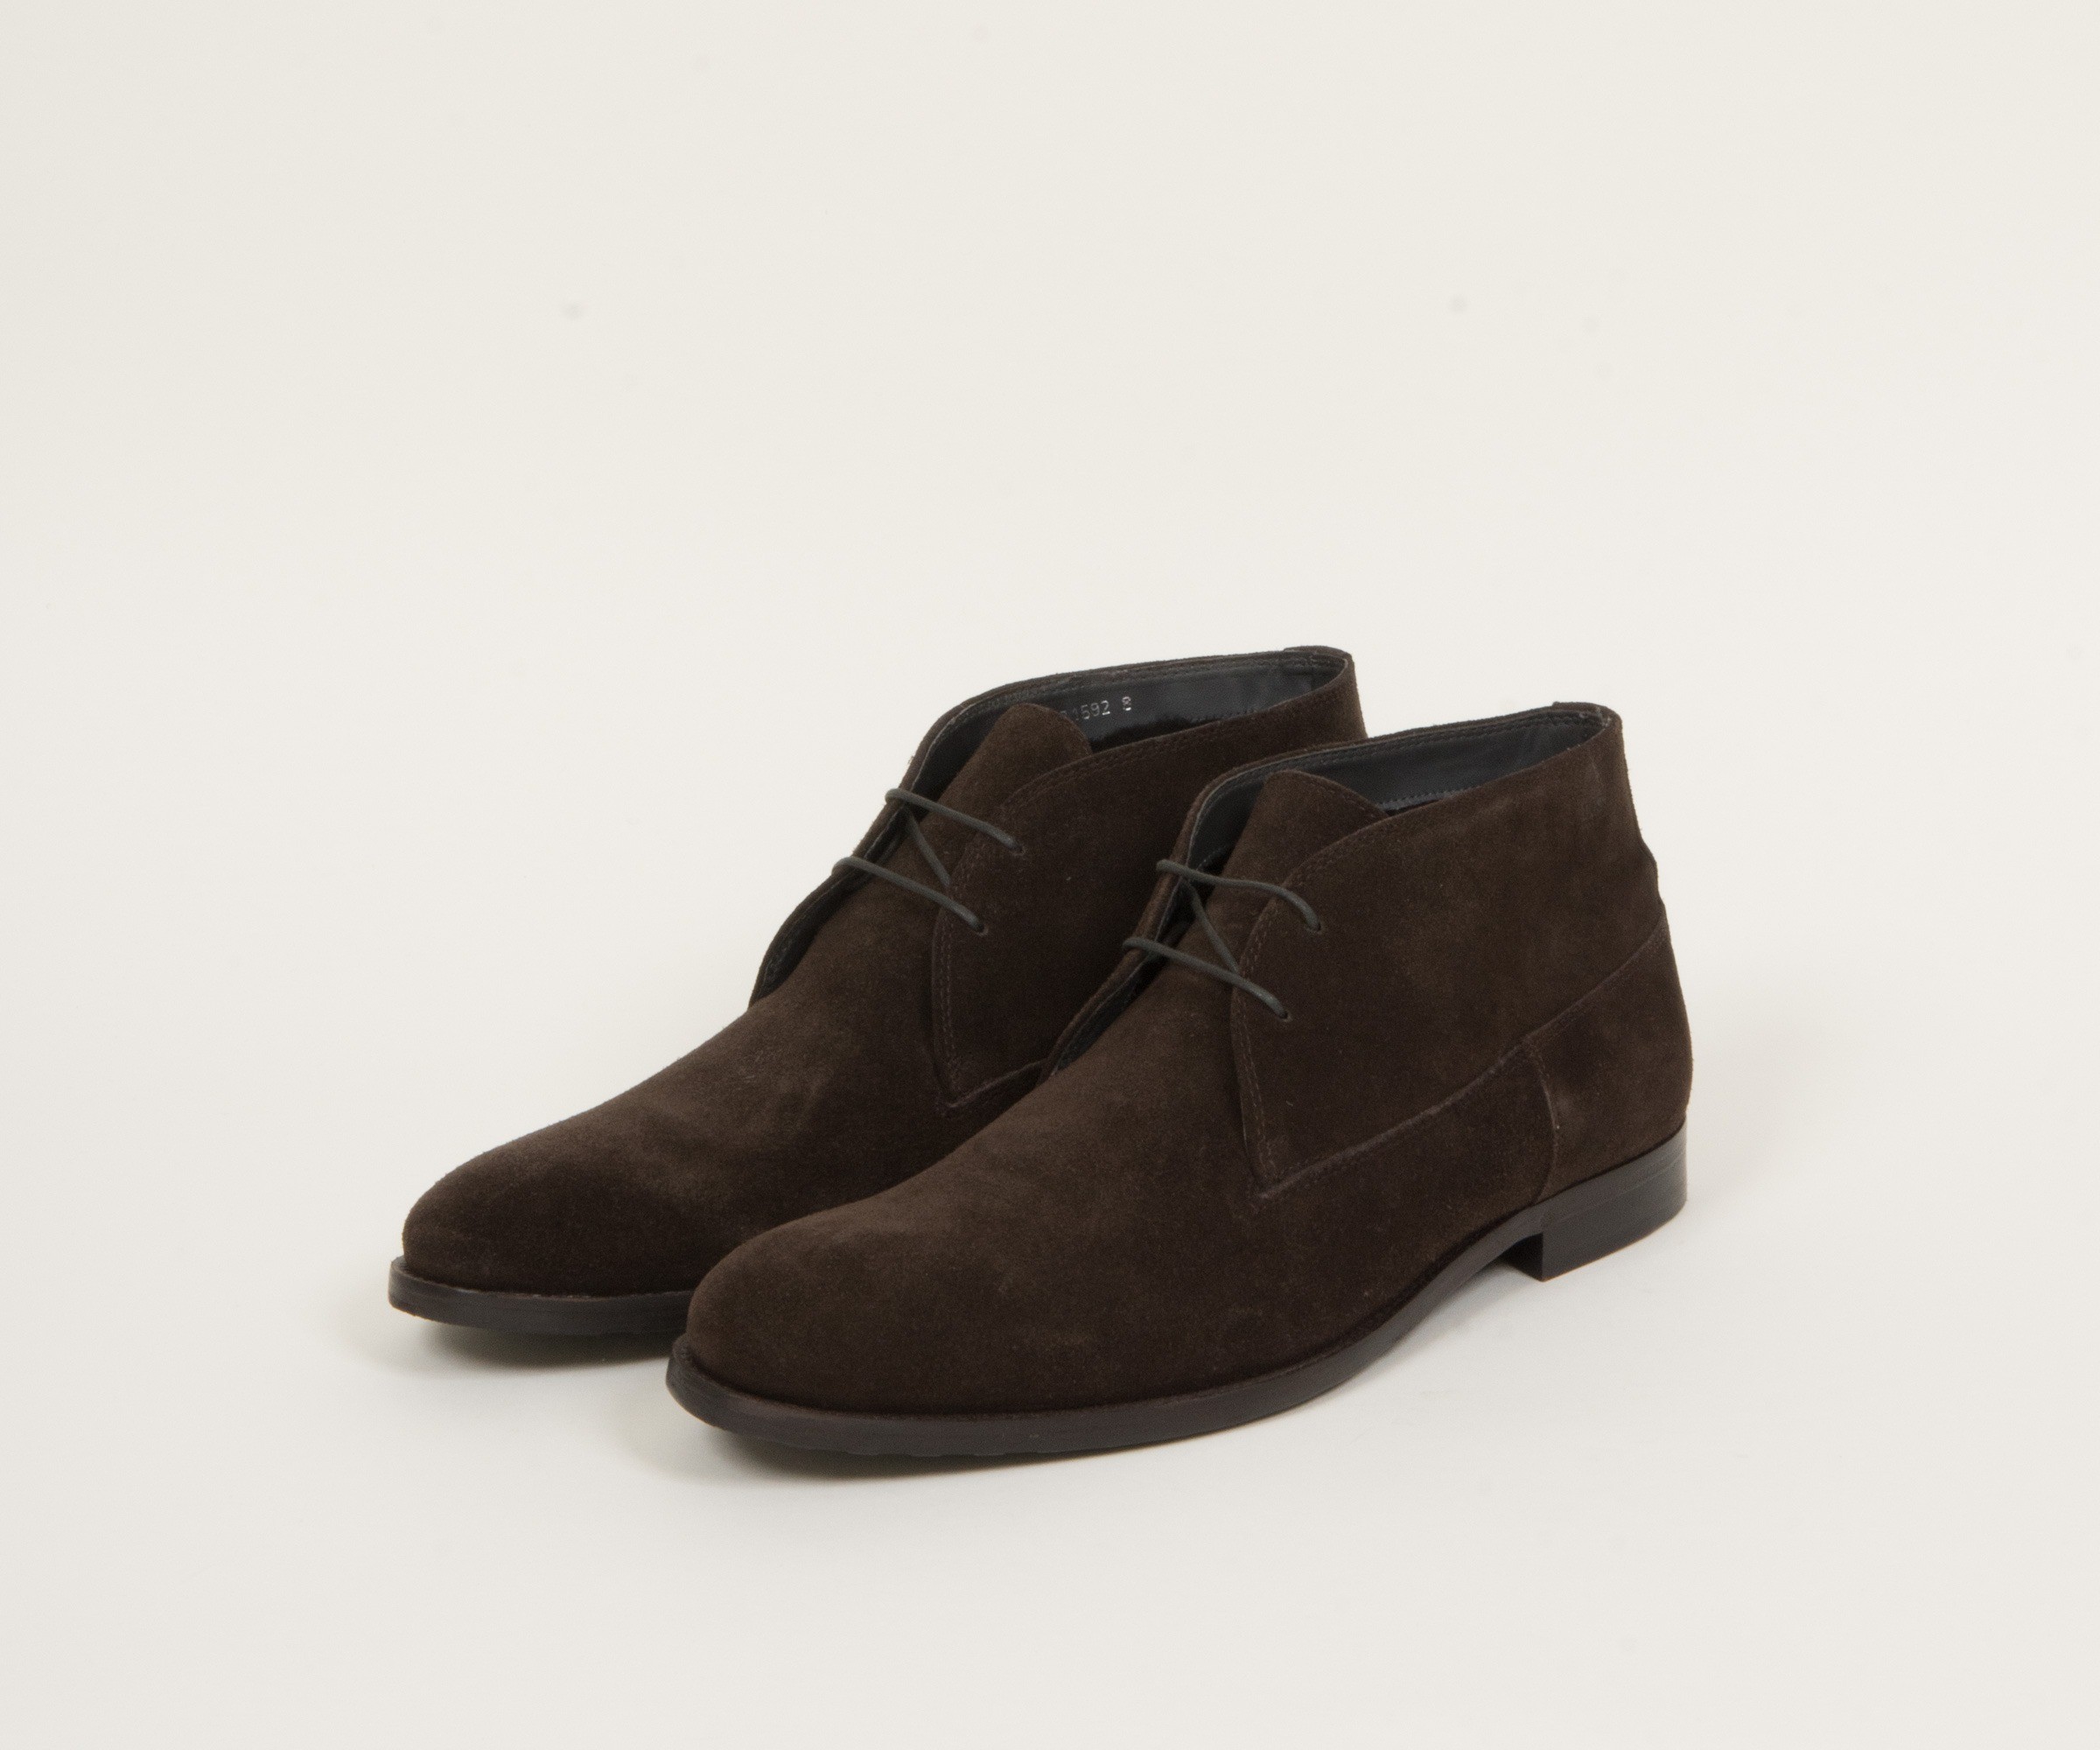 Hugo Boss Fur Lined Suede Desert Boot Dark Brown (Without Box & Laces)